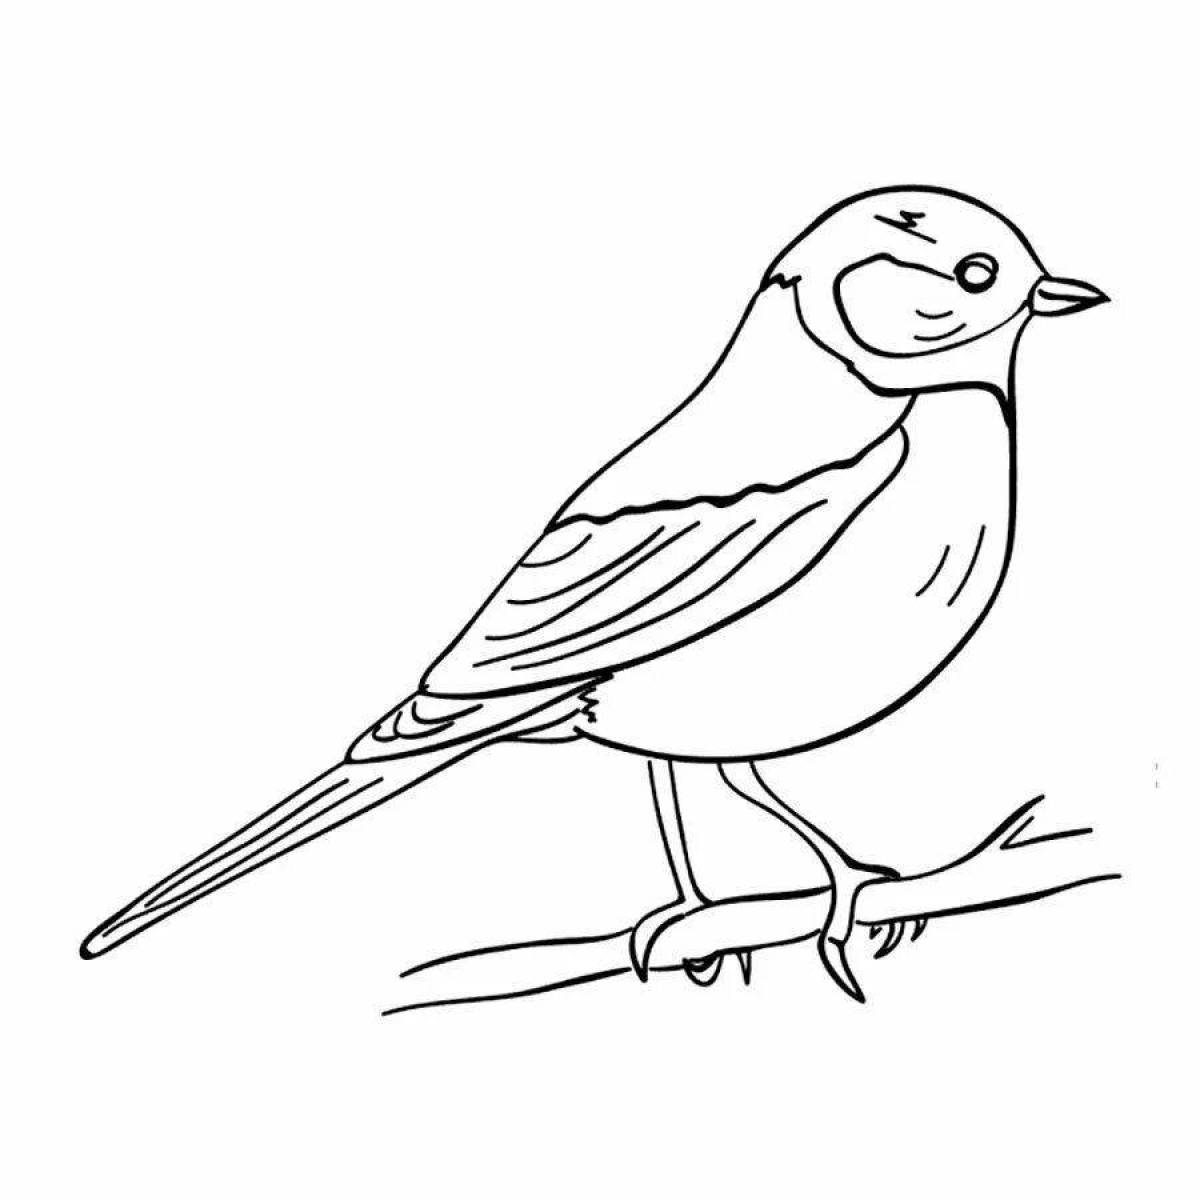 Unique sparrow coloring book for kids 6-7 years old